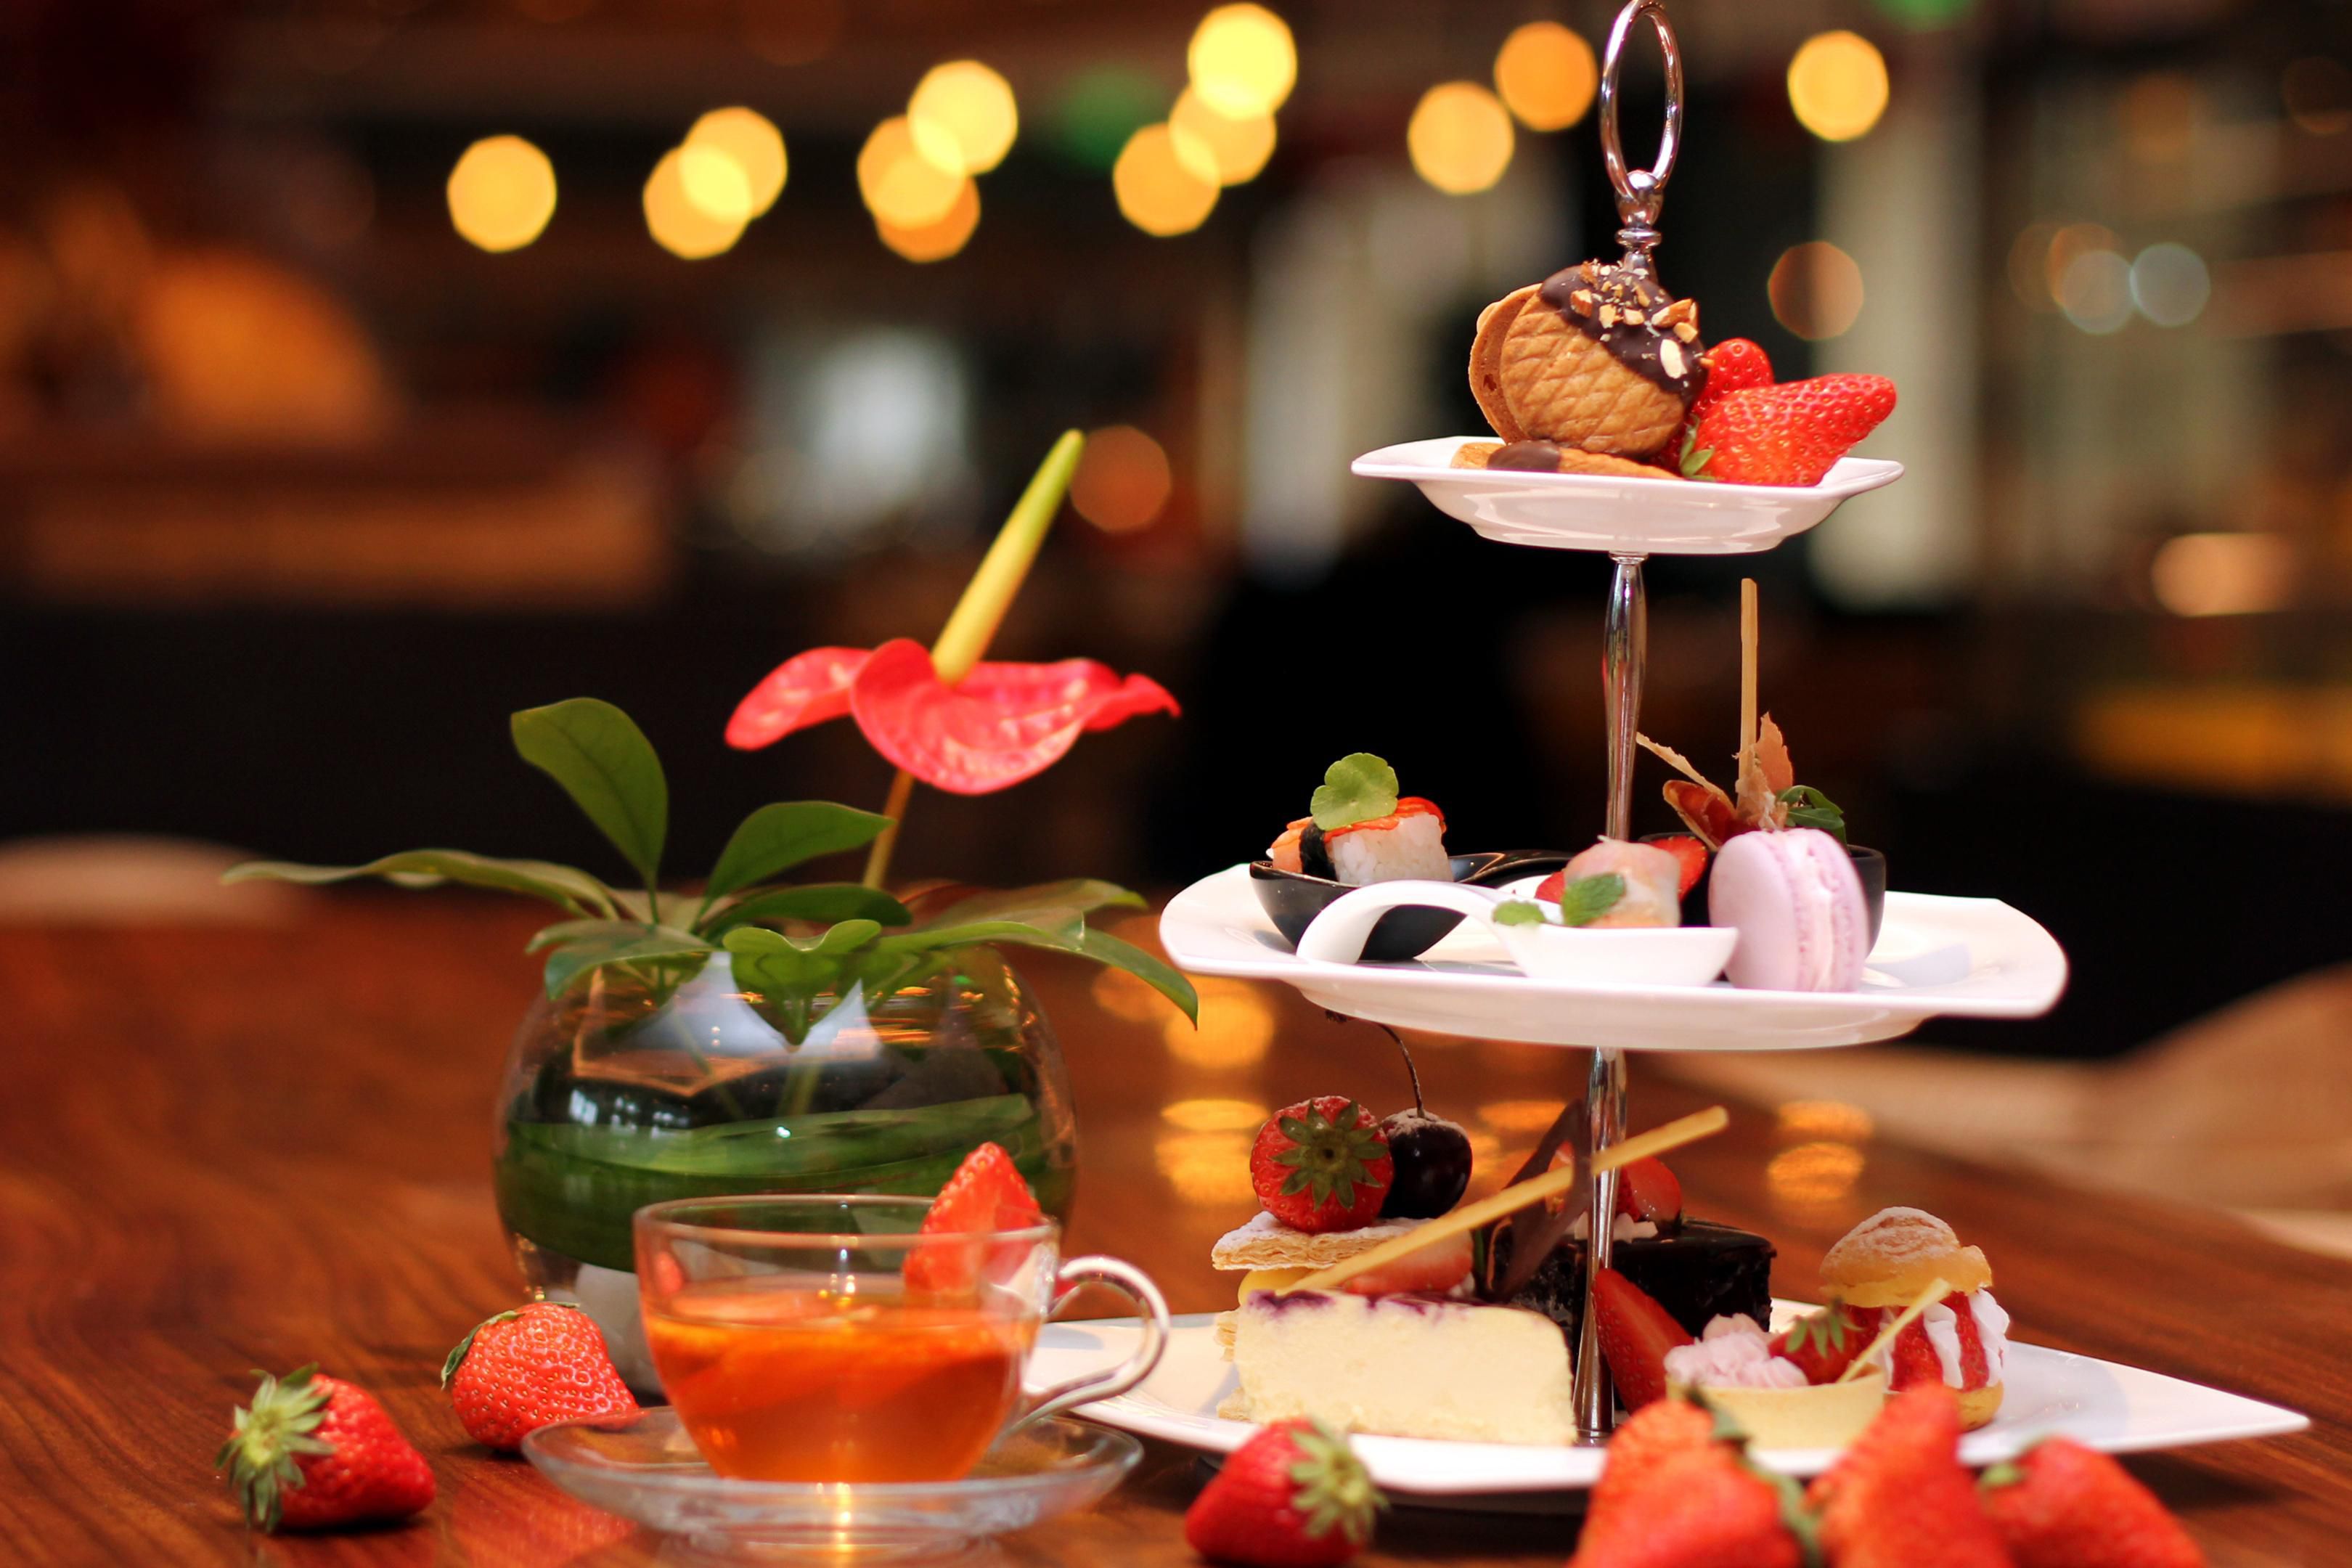 Fall in love with strawberry Afternoon Tea